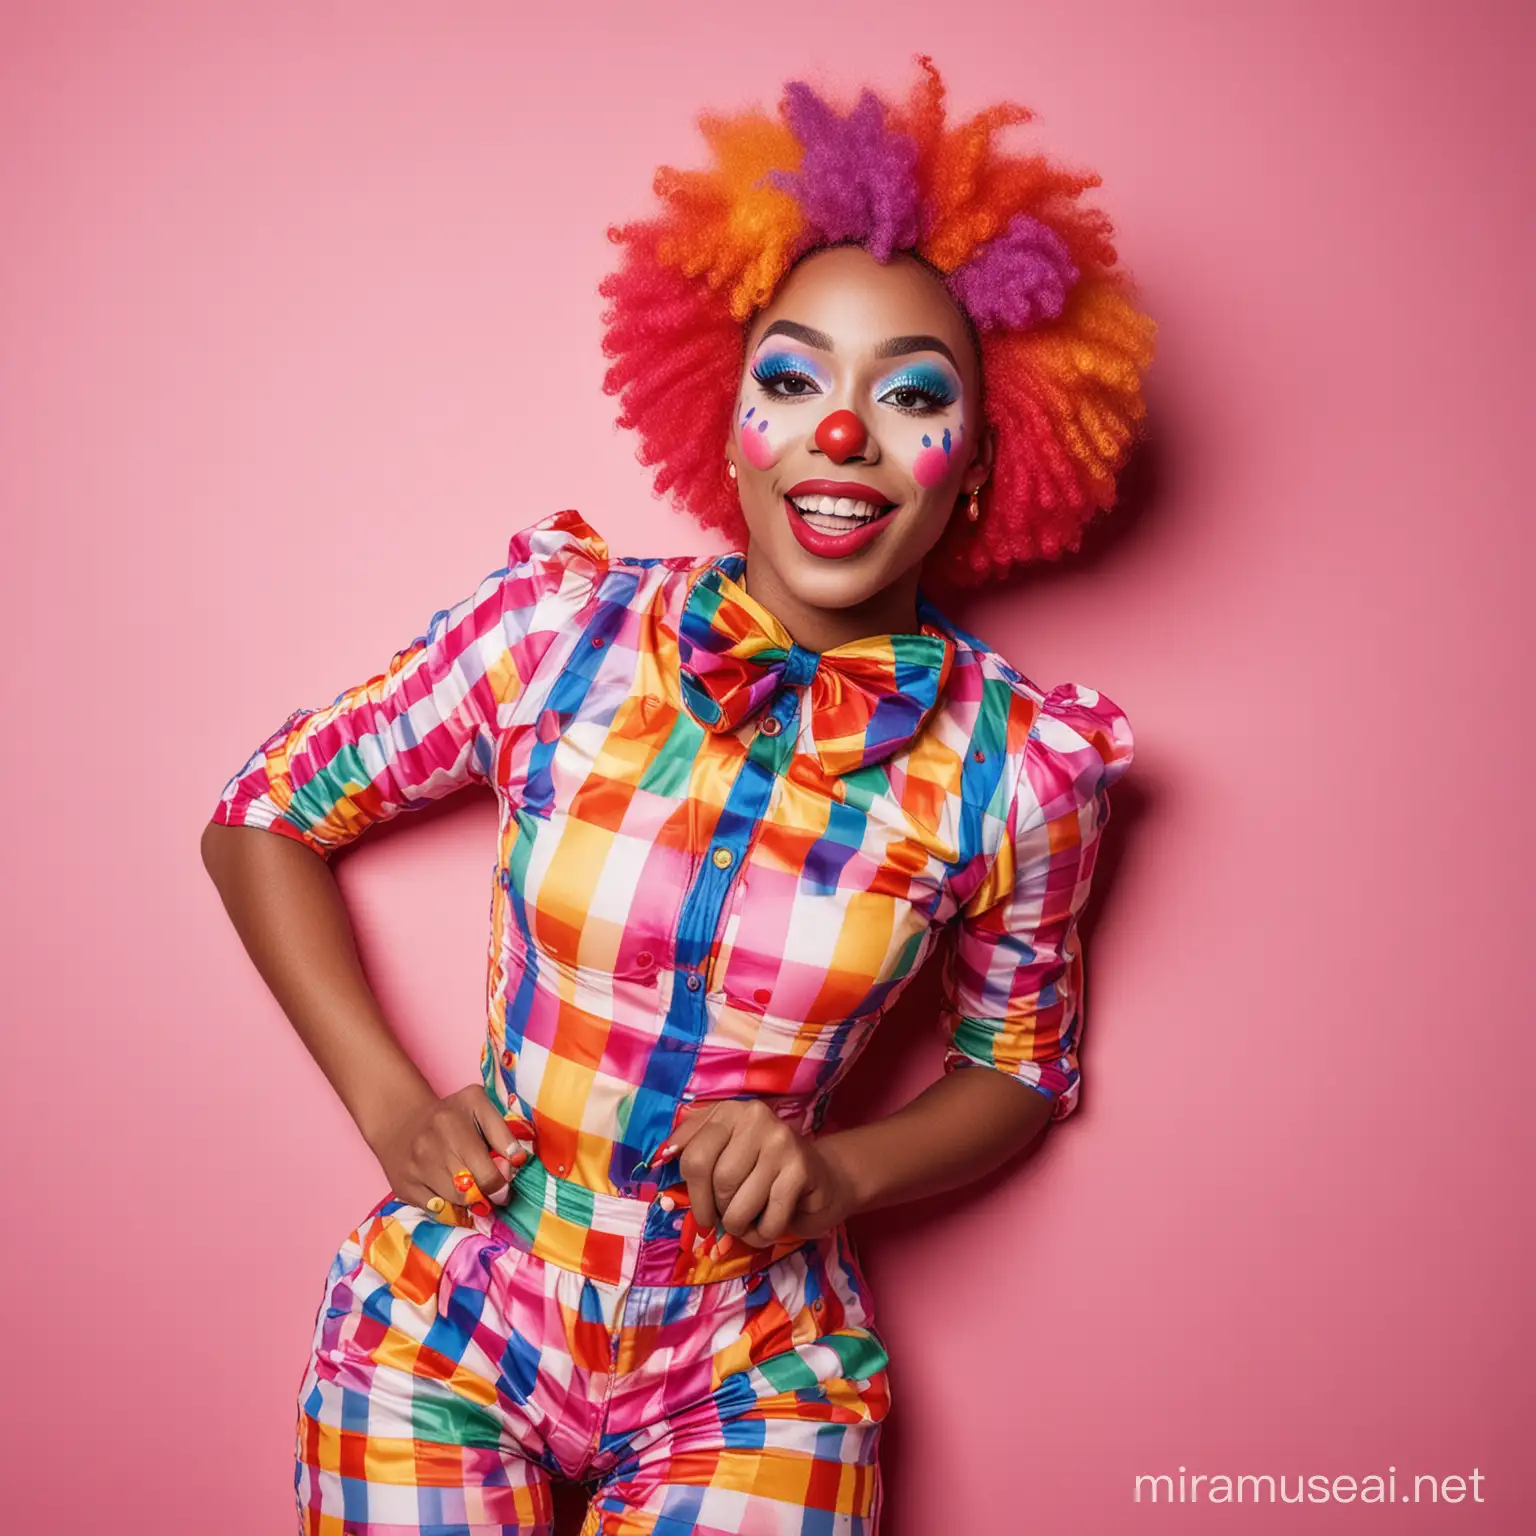 Excited Nigerian Model as Colorful Clown Lying on Pink Background